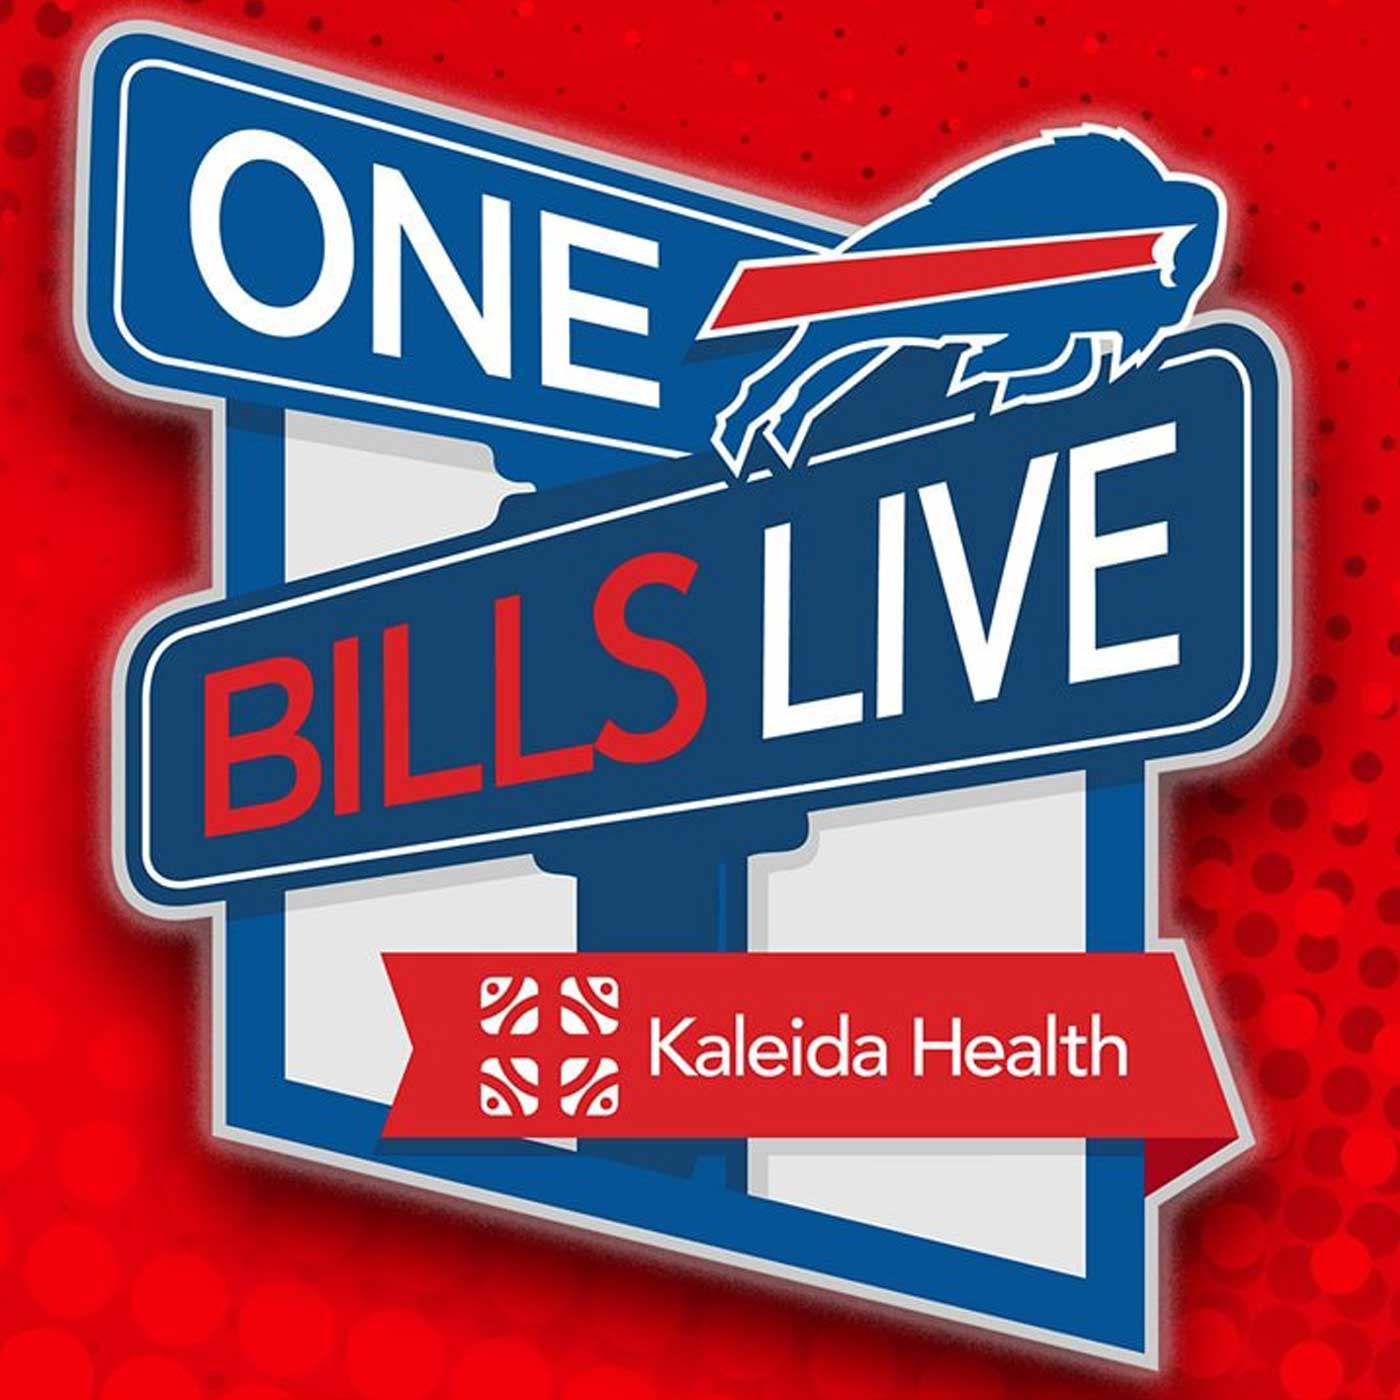 OBL 3/2: Judy Battista on the outlook for the 2021 NFL season, Marcellus Wiley shares his best Bills stories